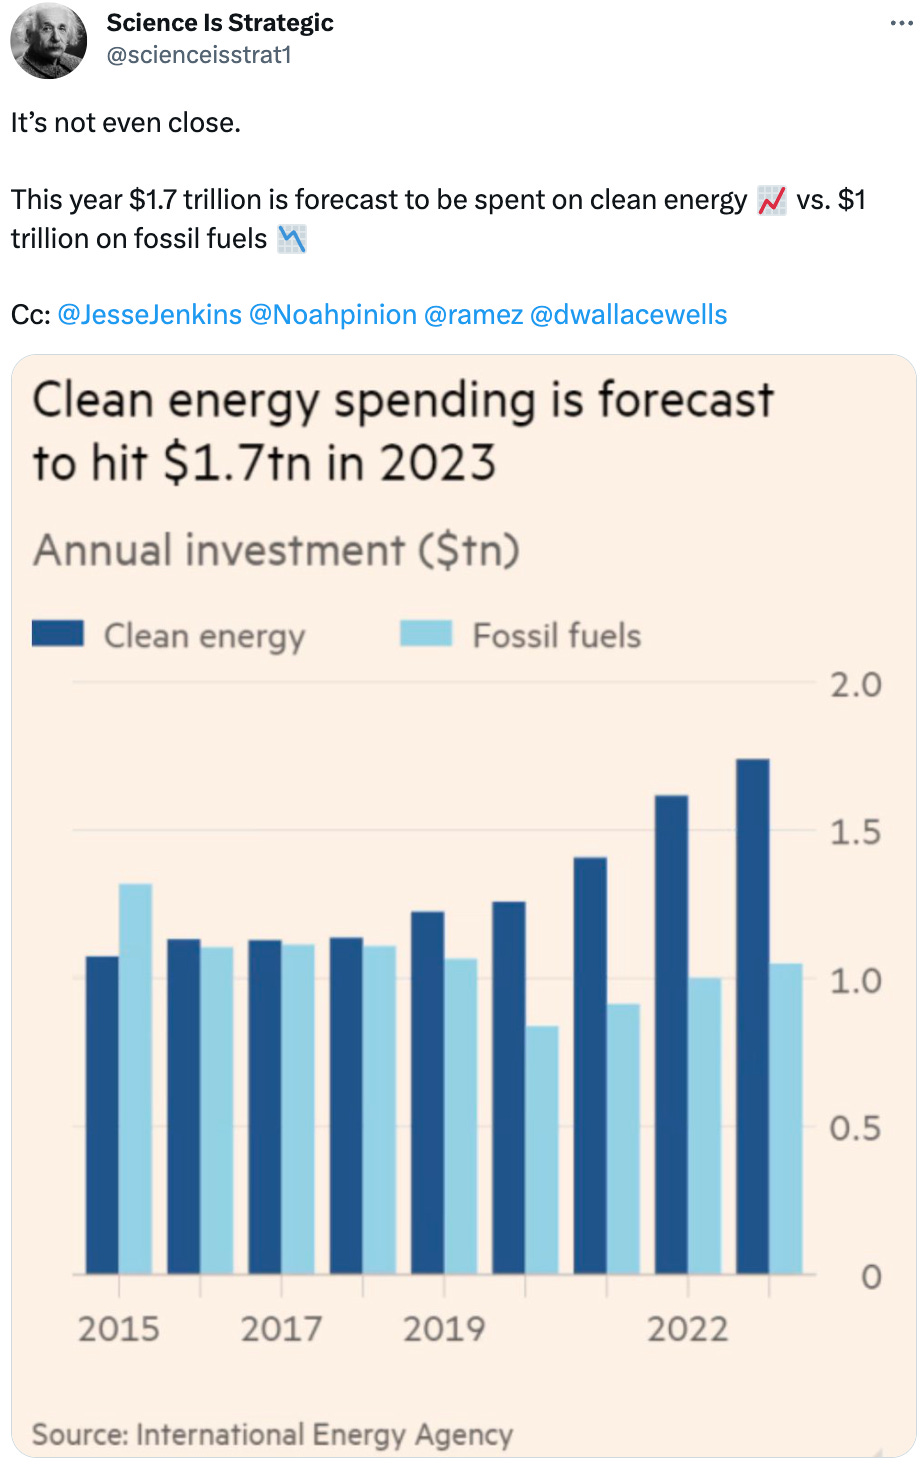  See new Tweets Conversation Science Is Strategic @scienceisstrat1 It’s not even close.   This year $1.7 trillion is forecast to be spent on clean energy 📈 vs. $1 trillion on fossil fuels 📉